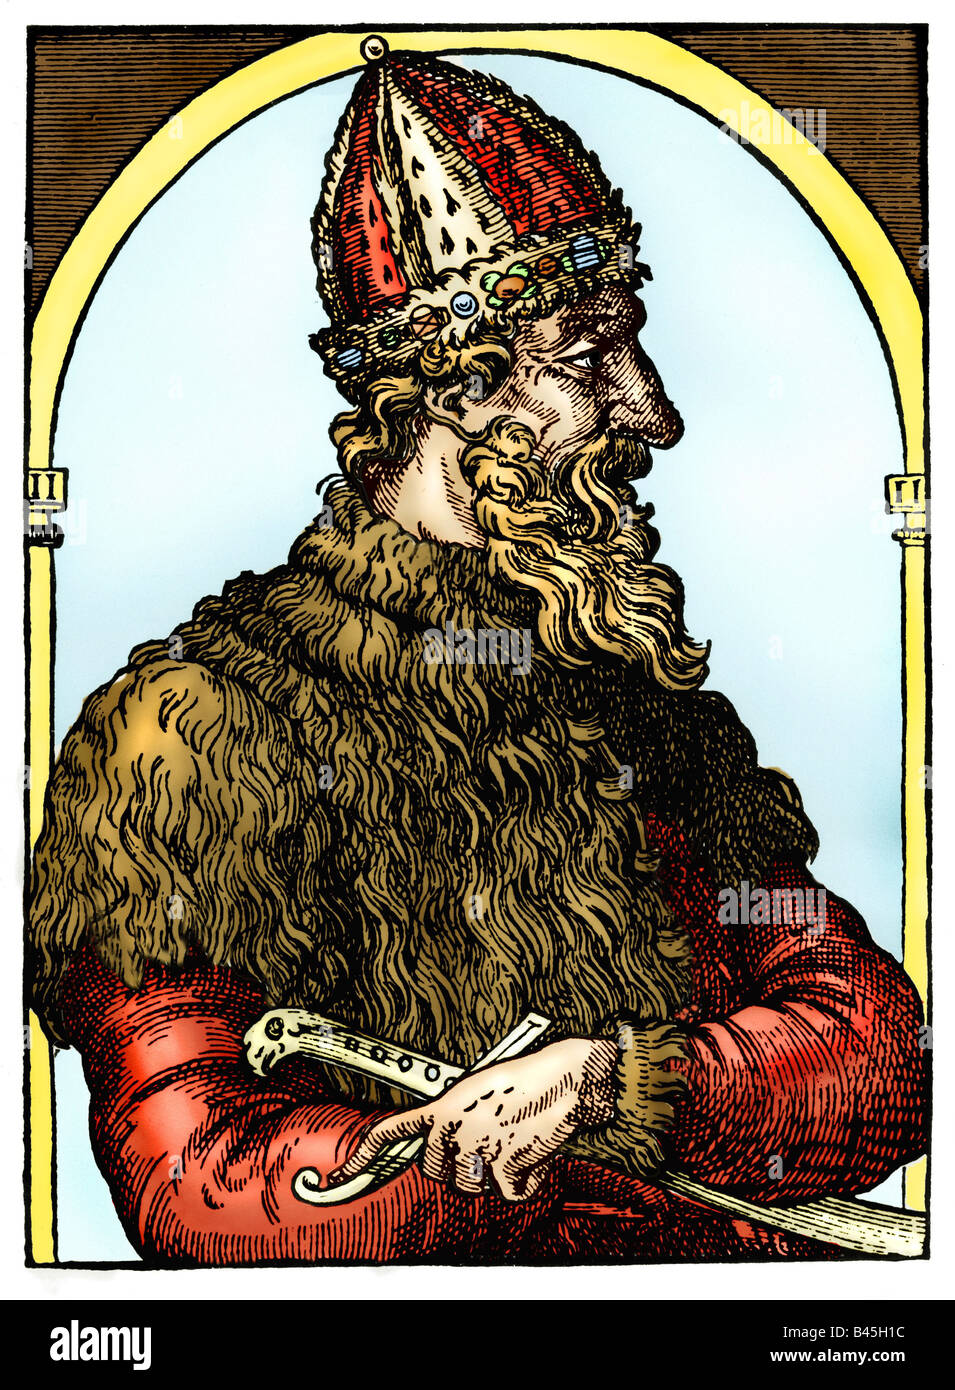 Ivan III Vasilevich 'the Great', 22.1.1440 - 27.10.1505, Grand Prince of Moscow 27.3.1462 - 27.10.1505, portrait, woodcut,  'Cosmographie universelle' by Andre Thevet, 1575, later coloured, , Stock Photo